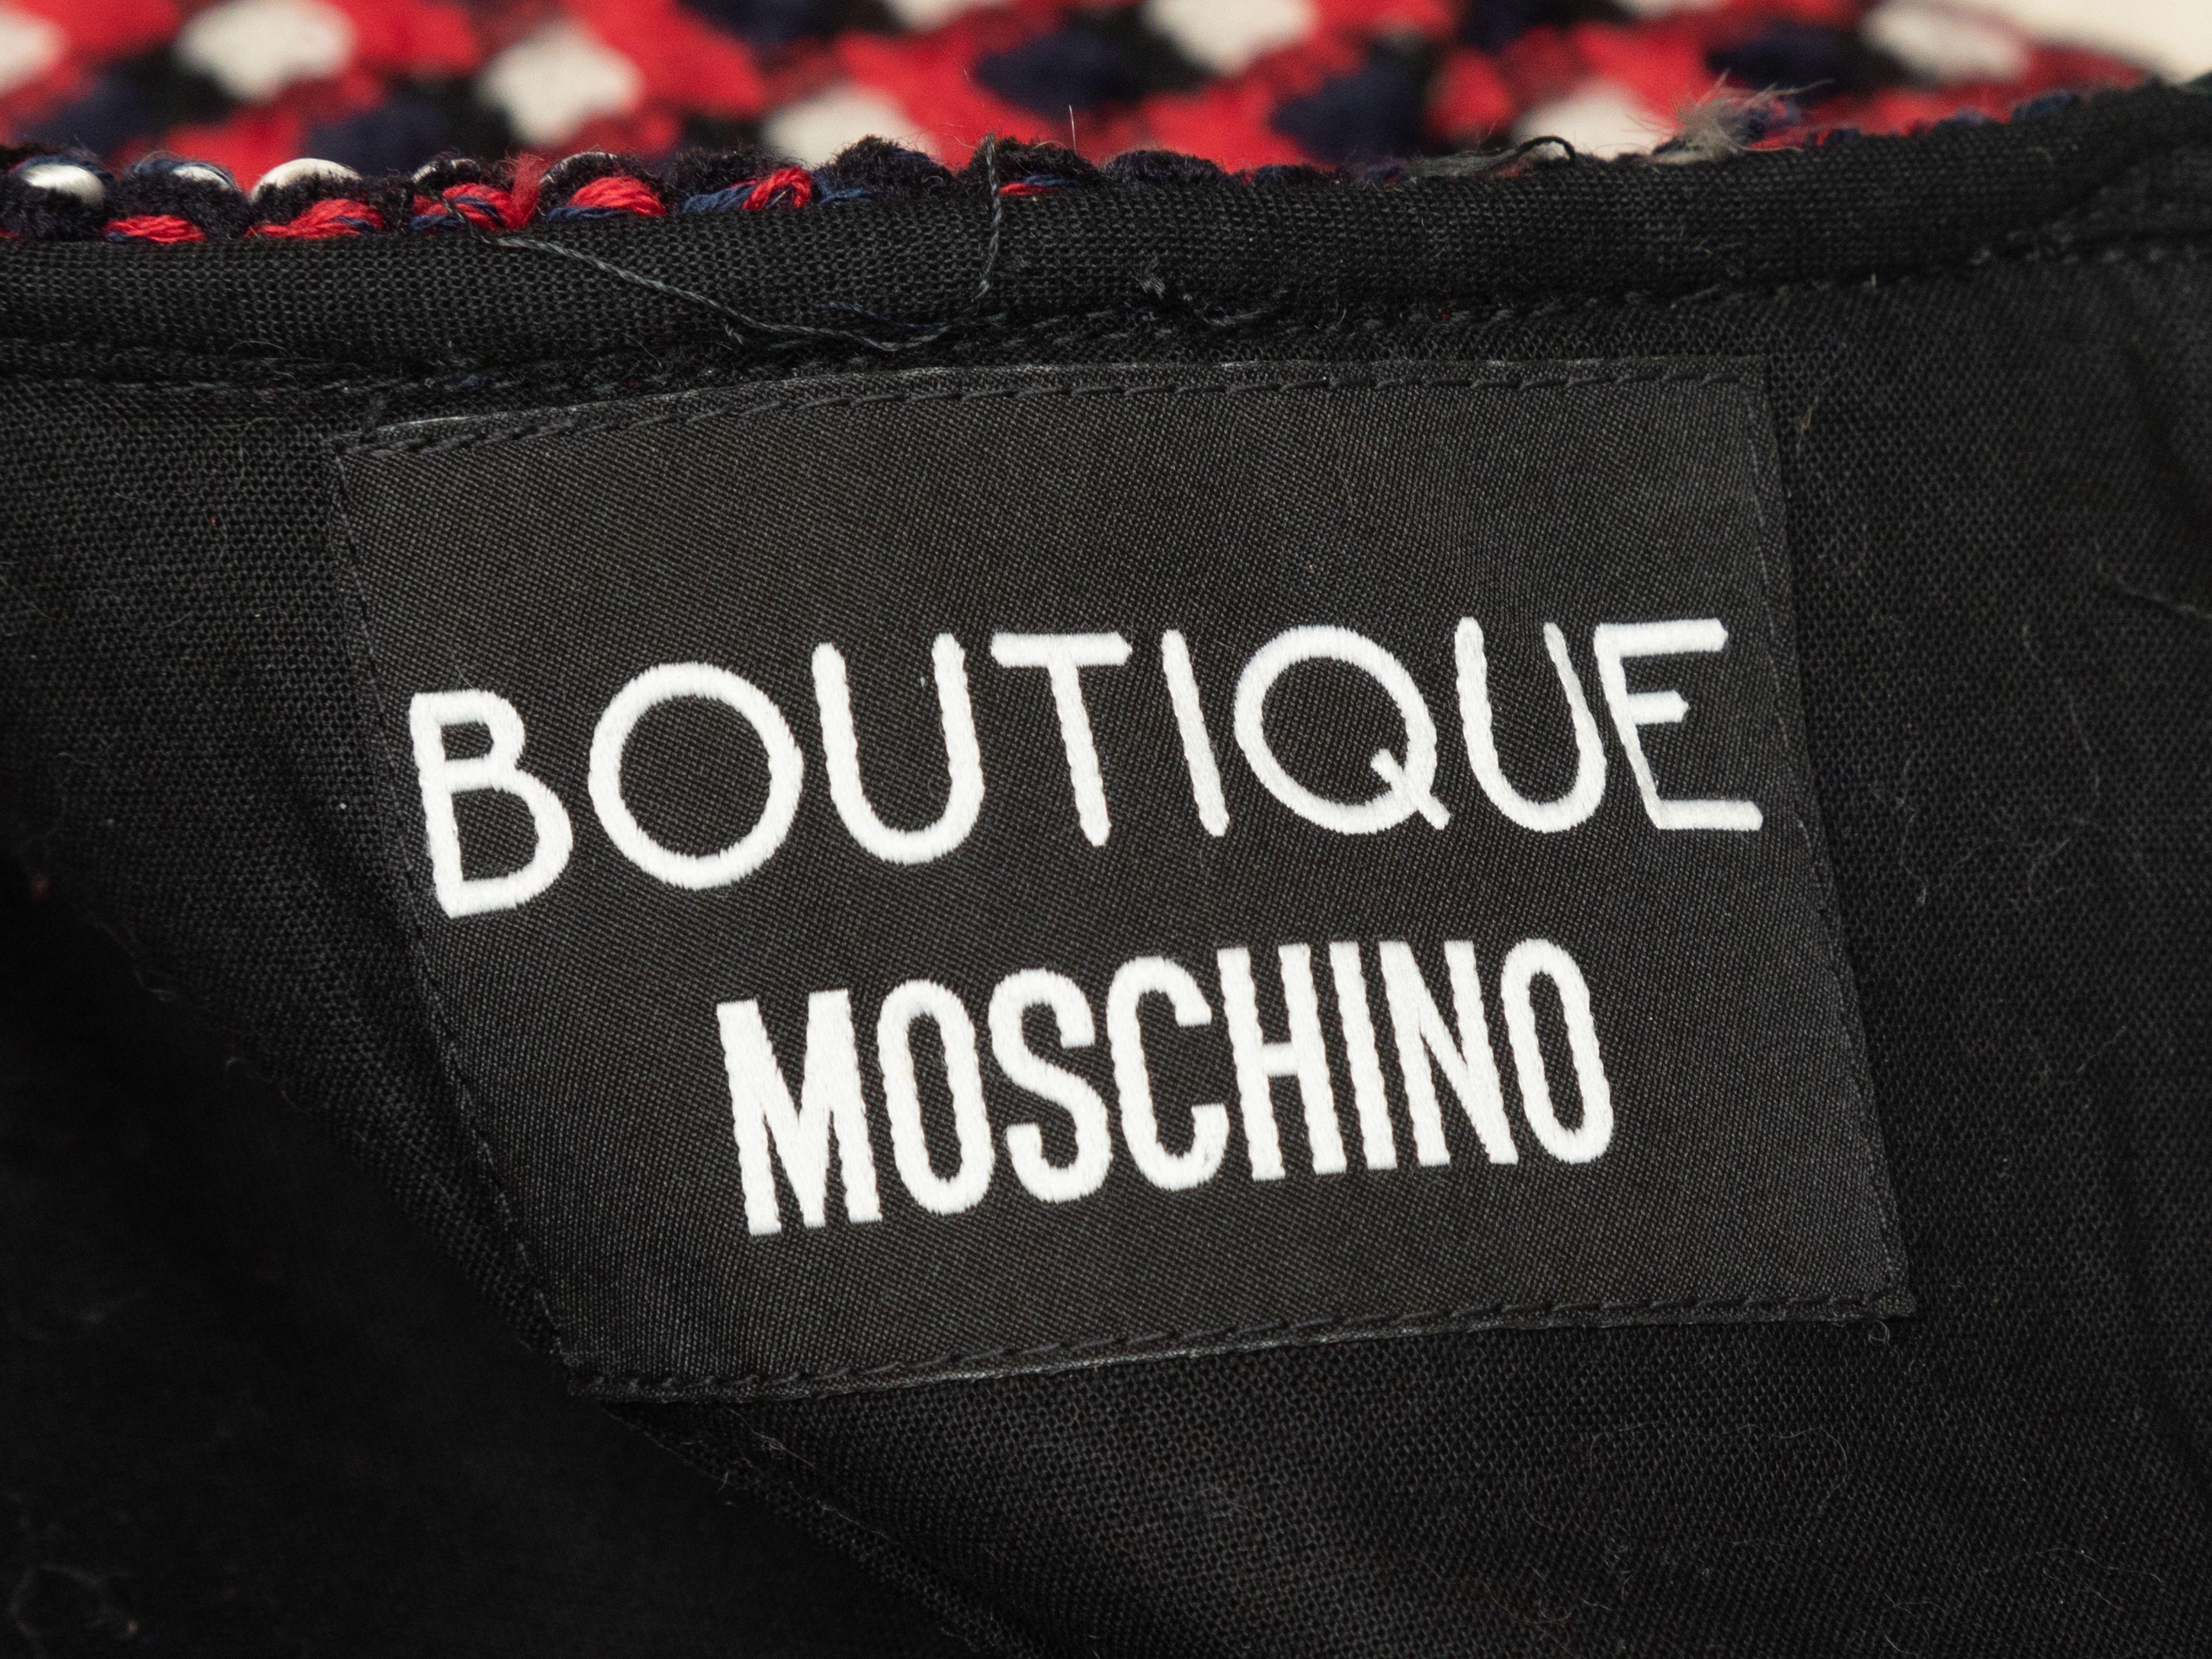 Product Details: Red and multicolor tweed short sleeve dress by Boutique Moschino. Crew neckline. Zip closure at back. 33